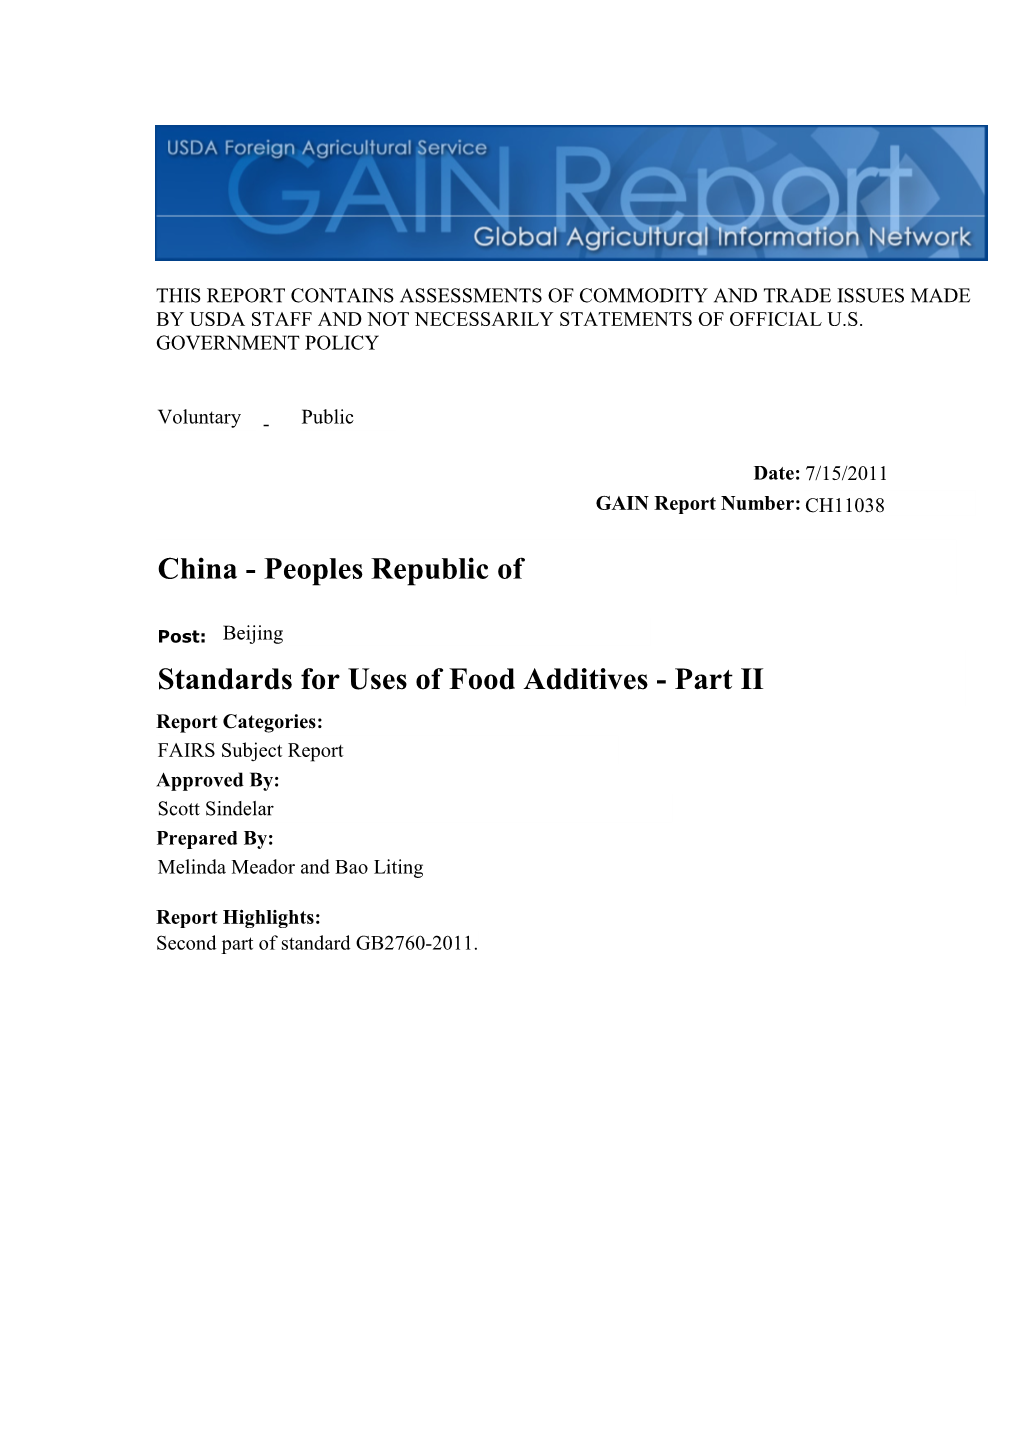 Standards for Uses of Food Additives - Part II